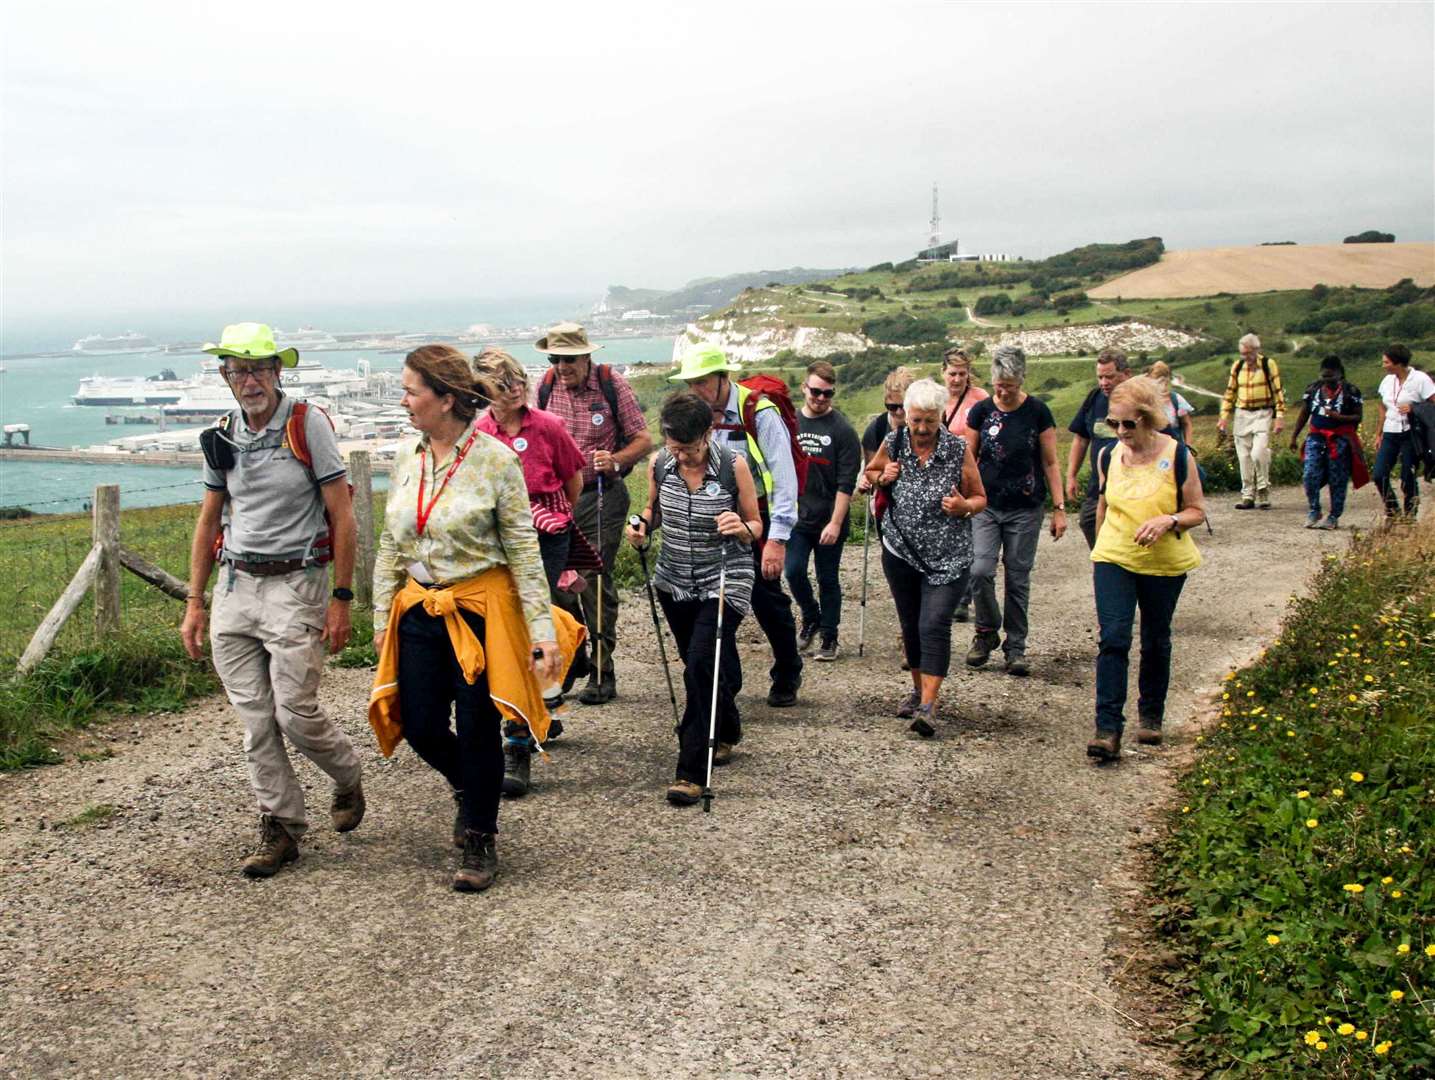 Walkers have a number of routes to choose from during the White Cliffs Walking Festival